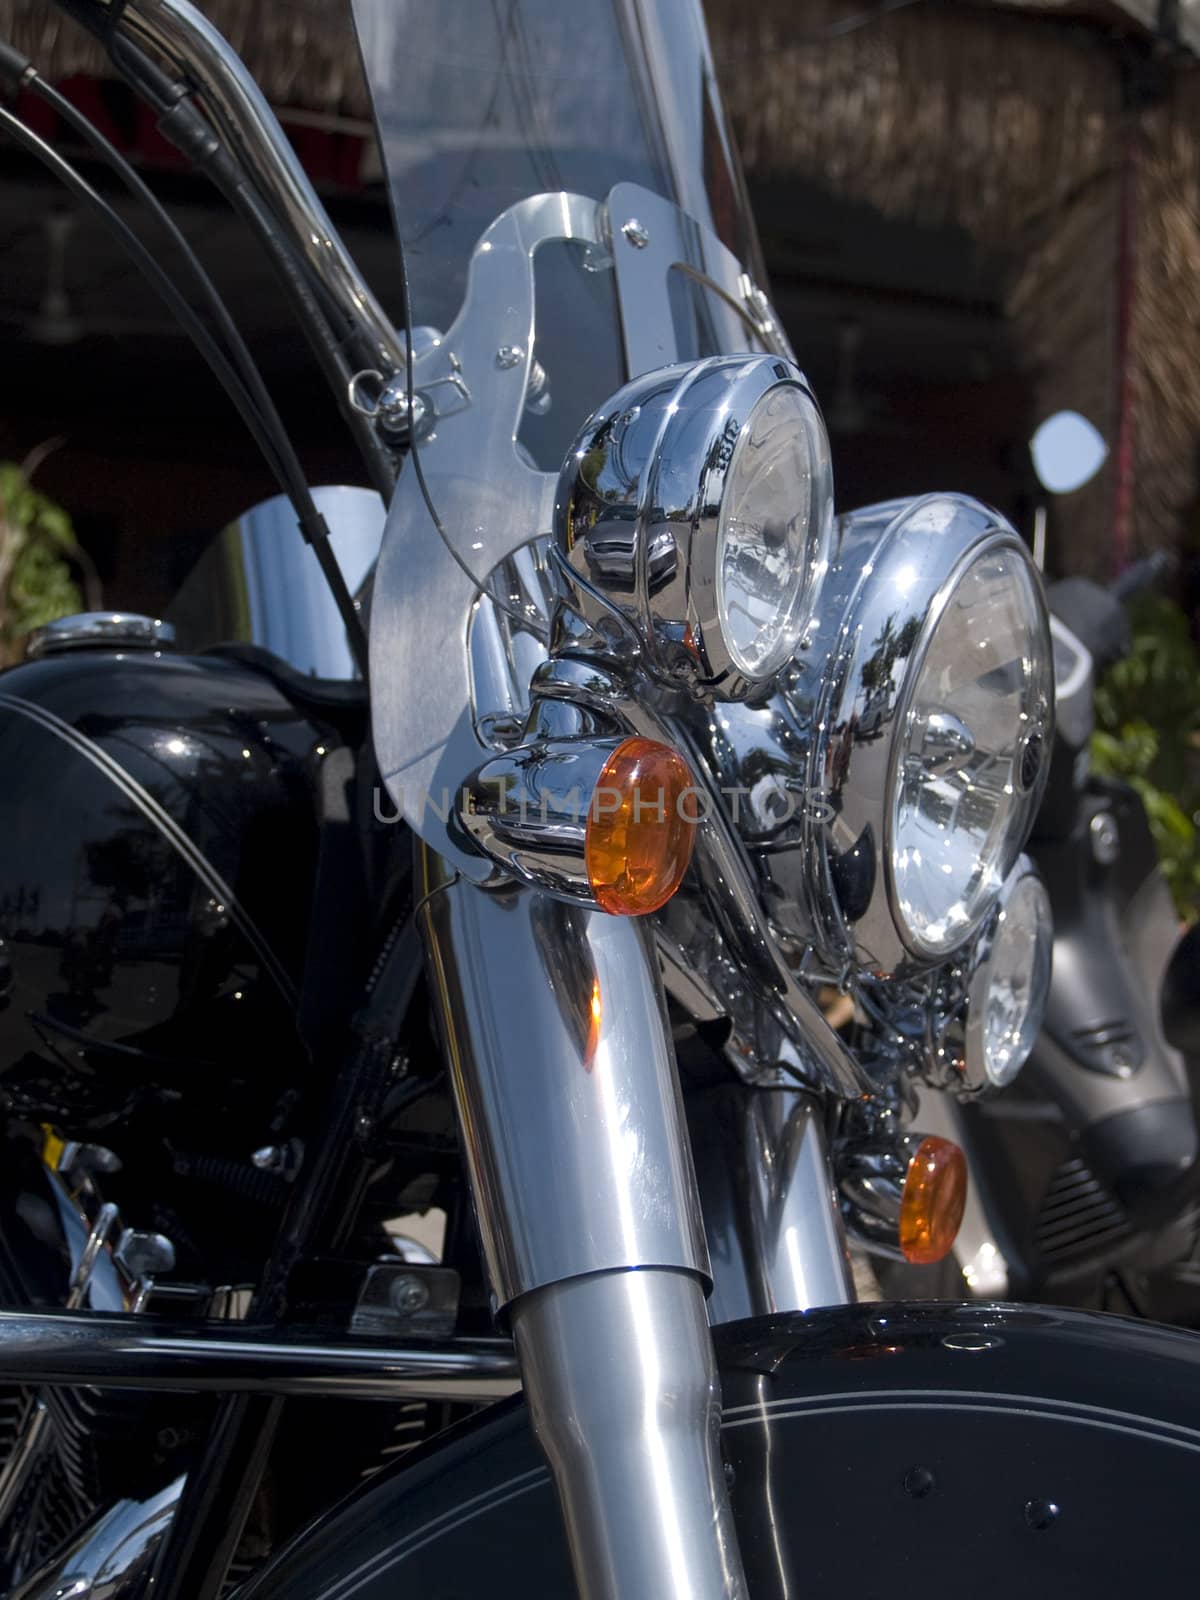 Chrome headlights of classic American motorcycle. Shallow depth of field.